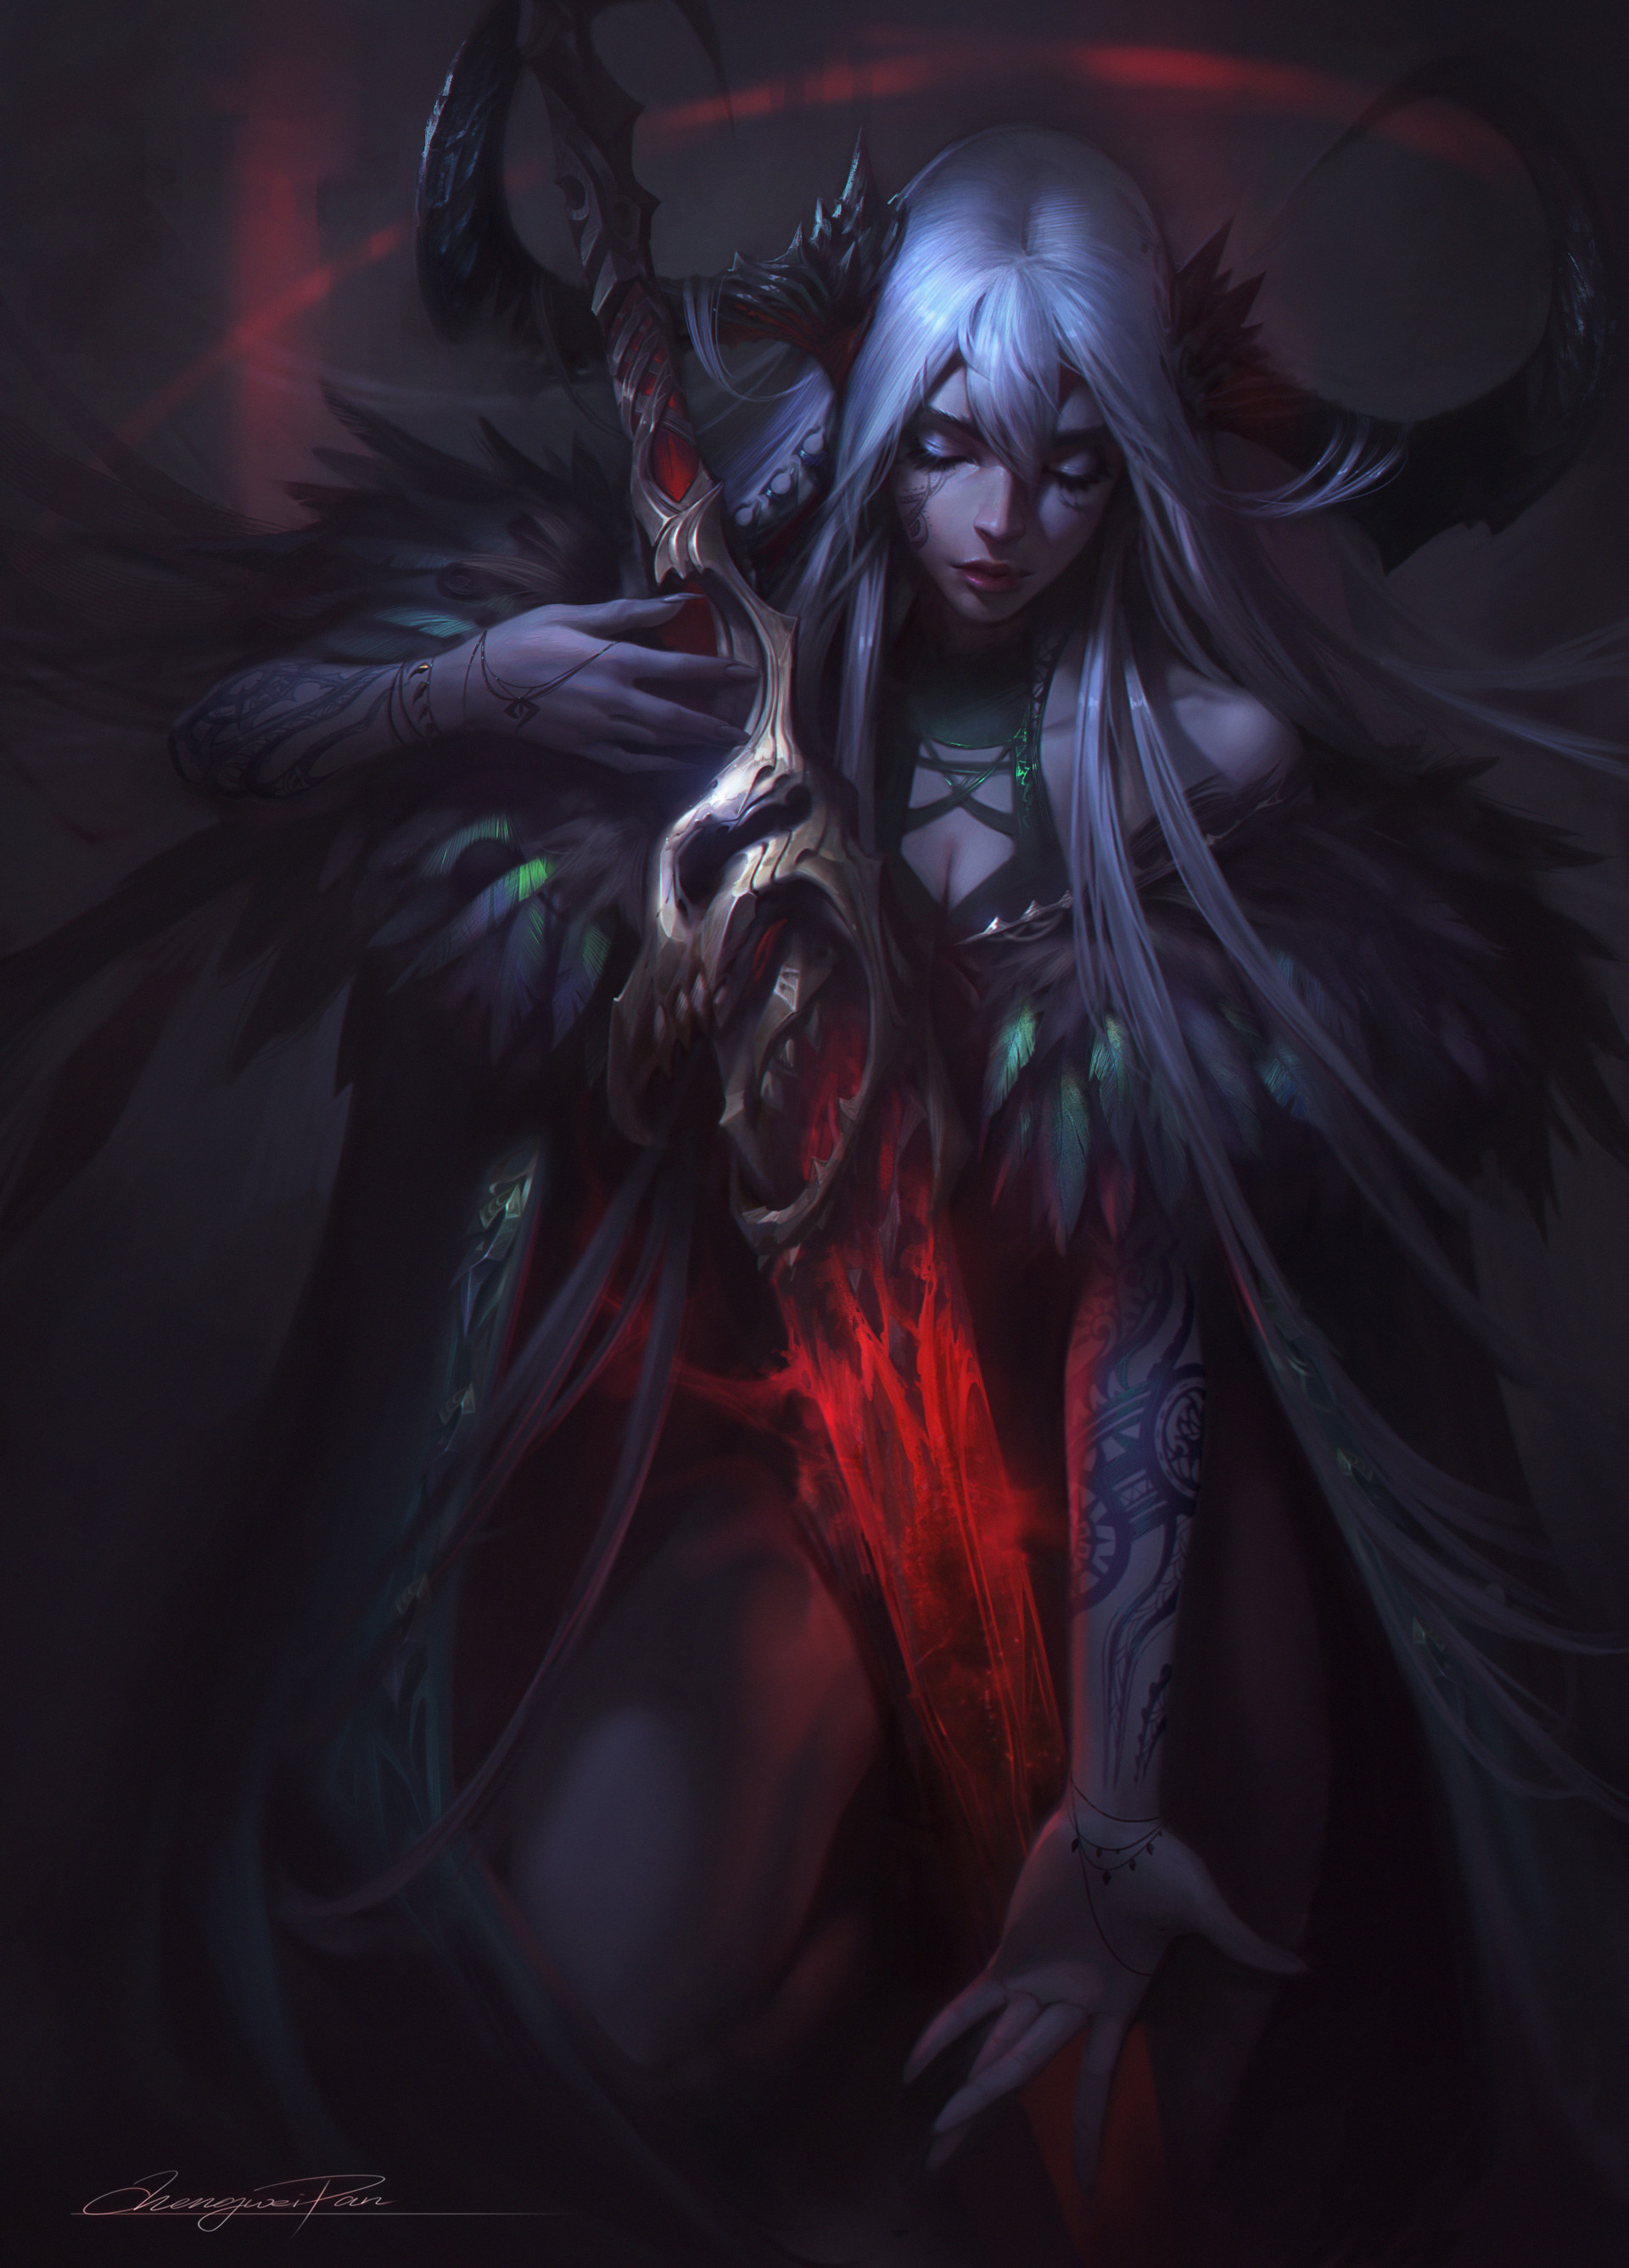 General 1920x2673 Chengwei Pan drawing silver hair horns weapon sword glowing mantle dark fantasy art feathers